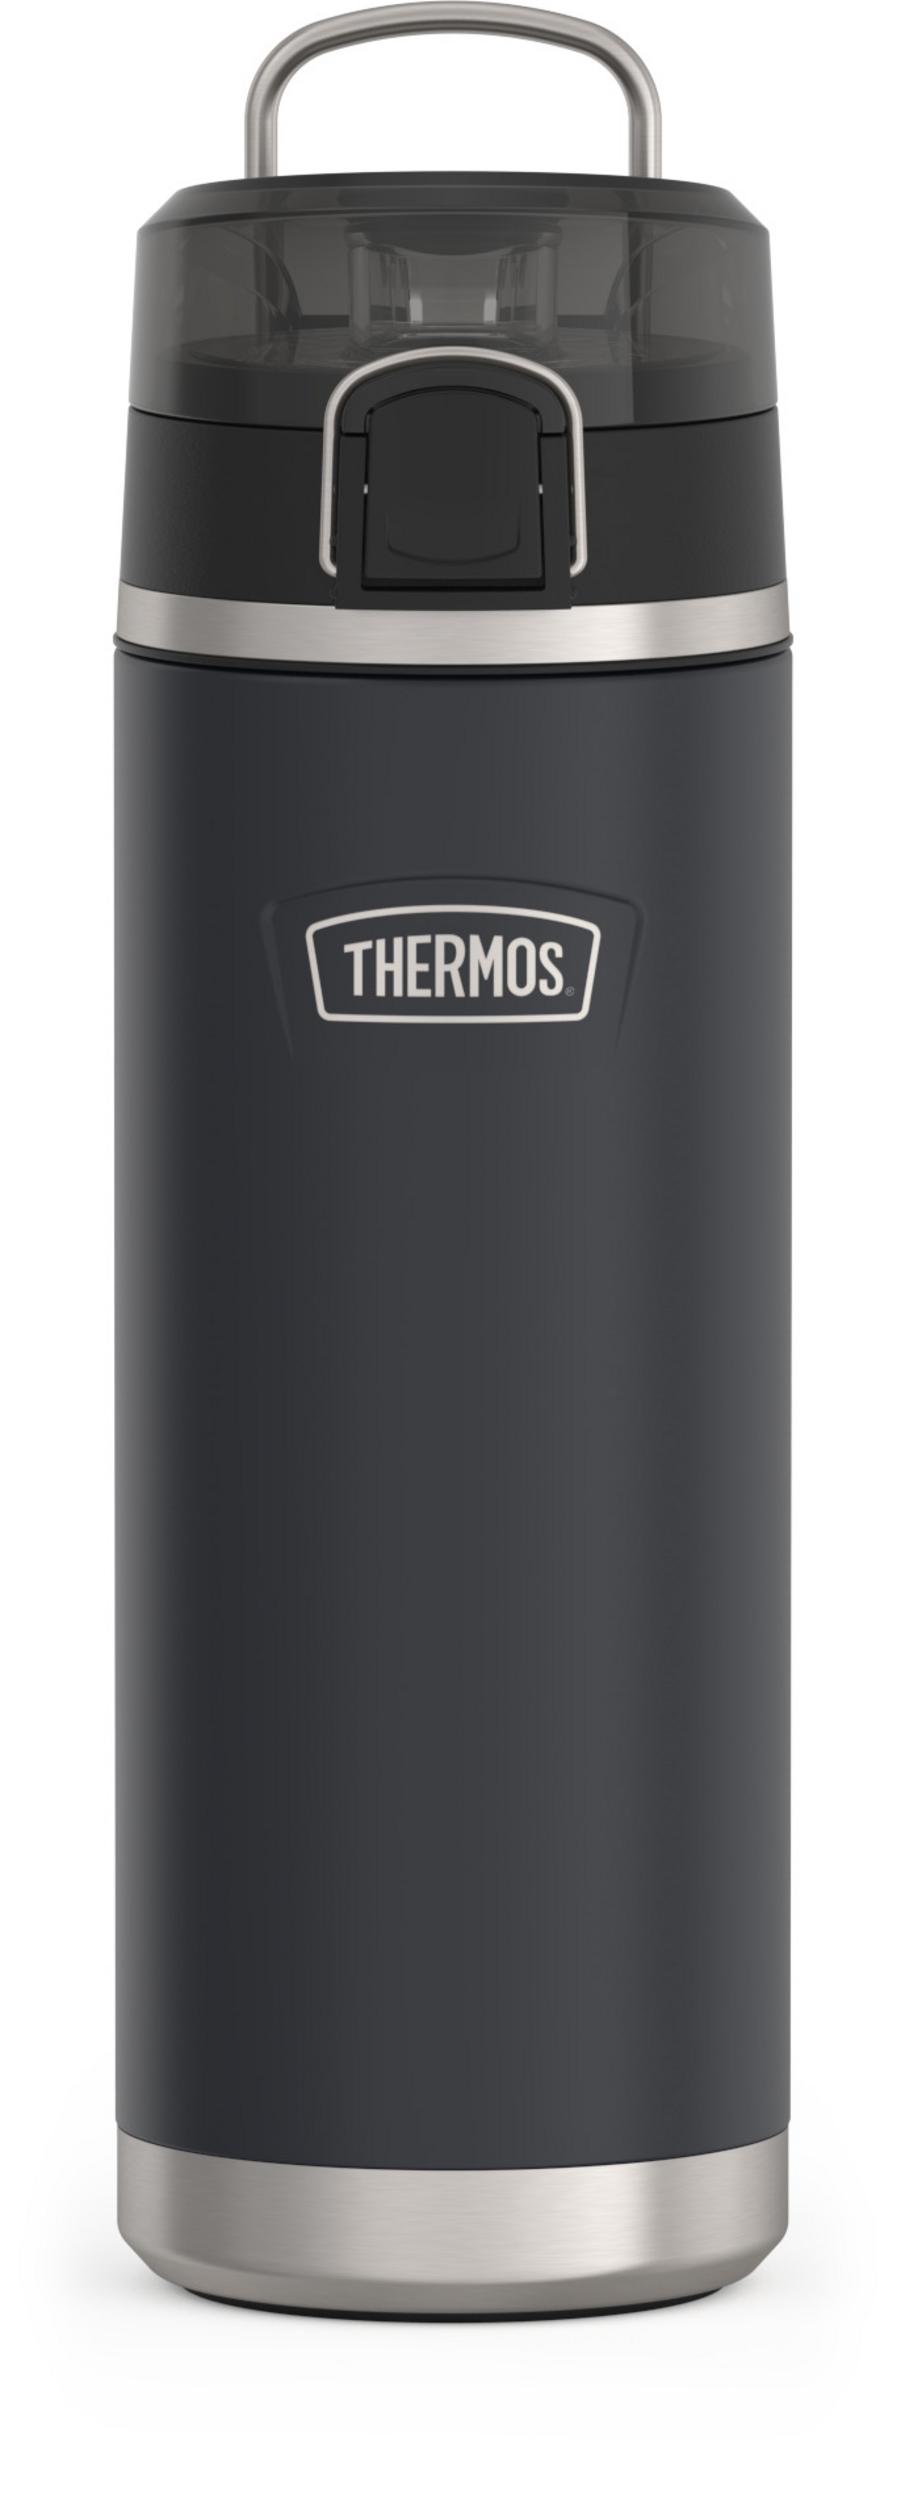 Thermos ICON Series Stainless Steel Vacuum Insulated Water Bottle w/ Spout, Granite, 24oz - image 1 of 13